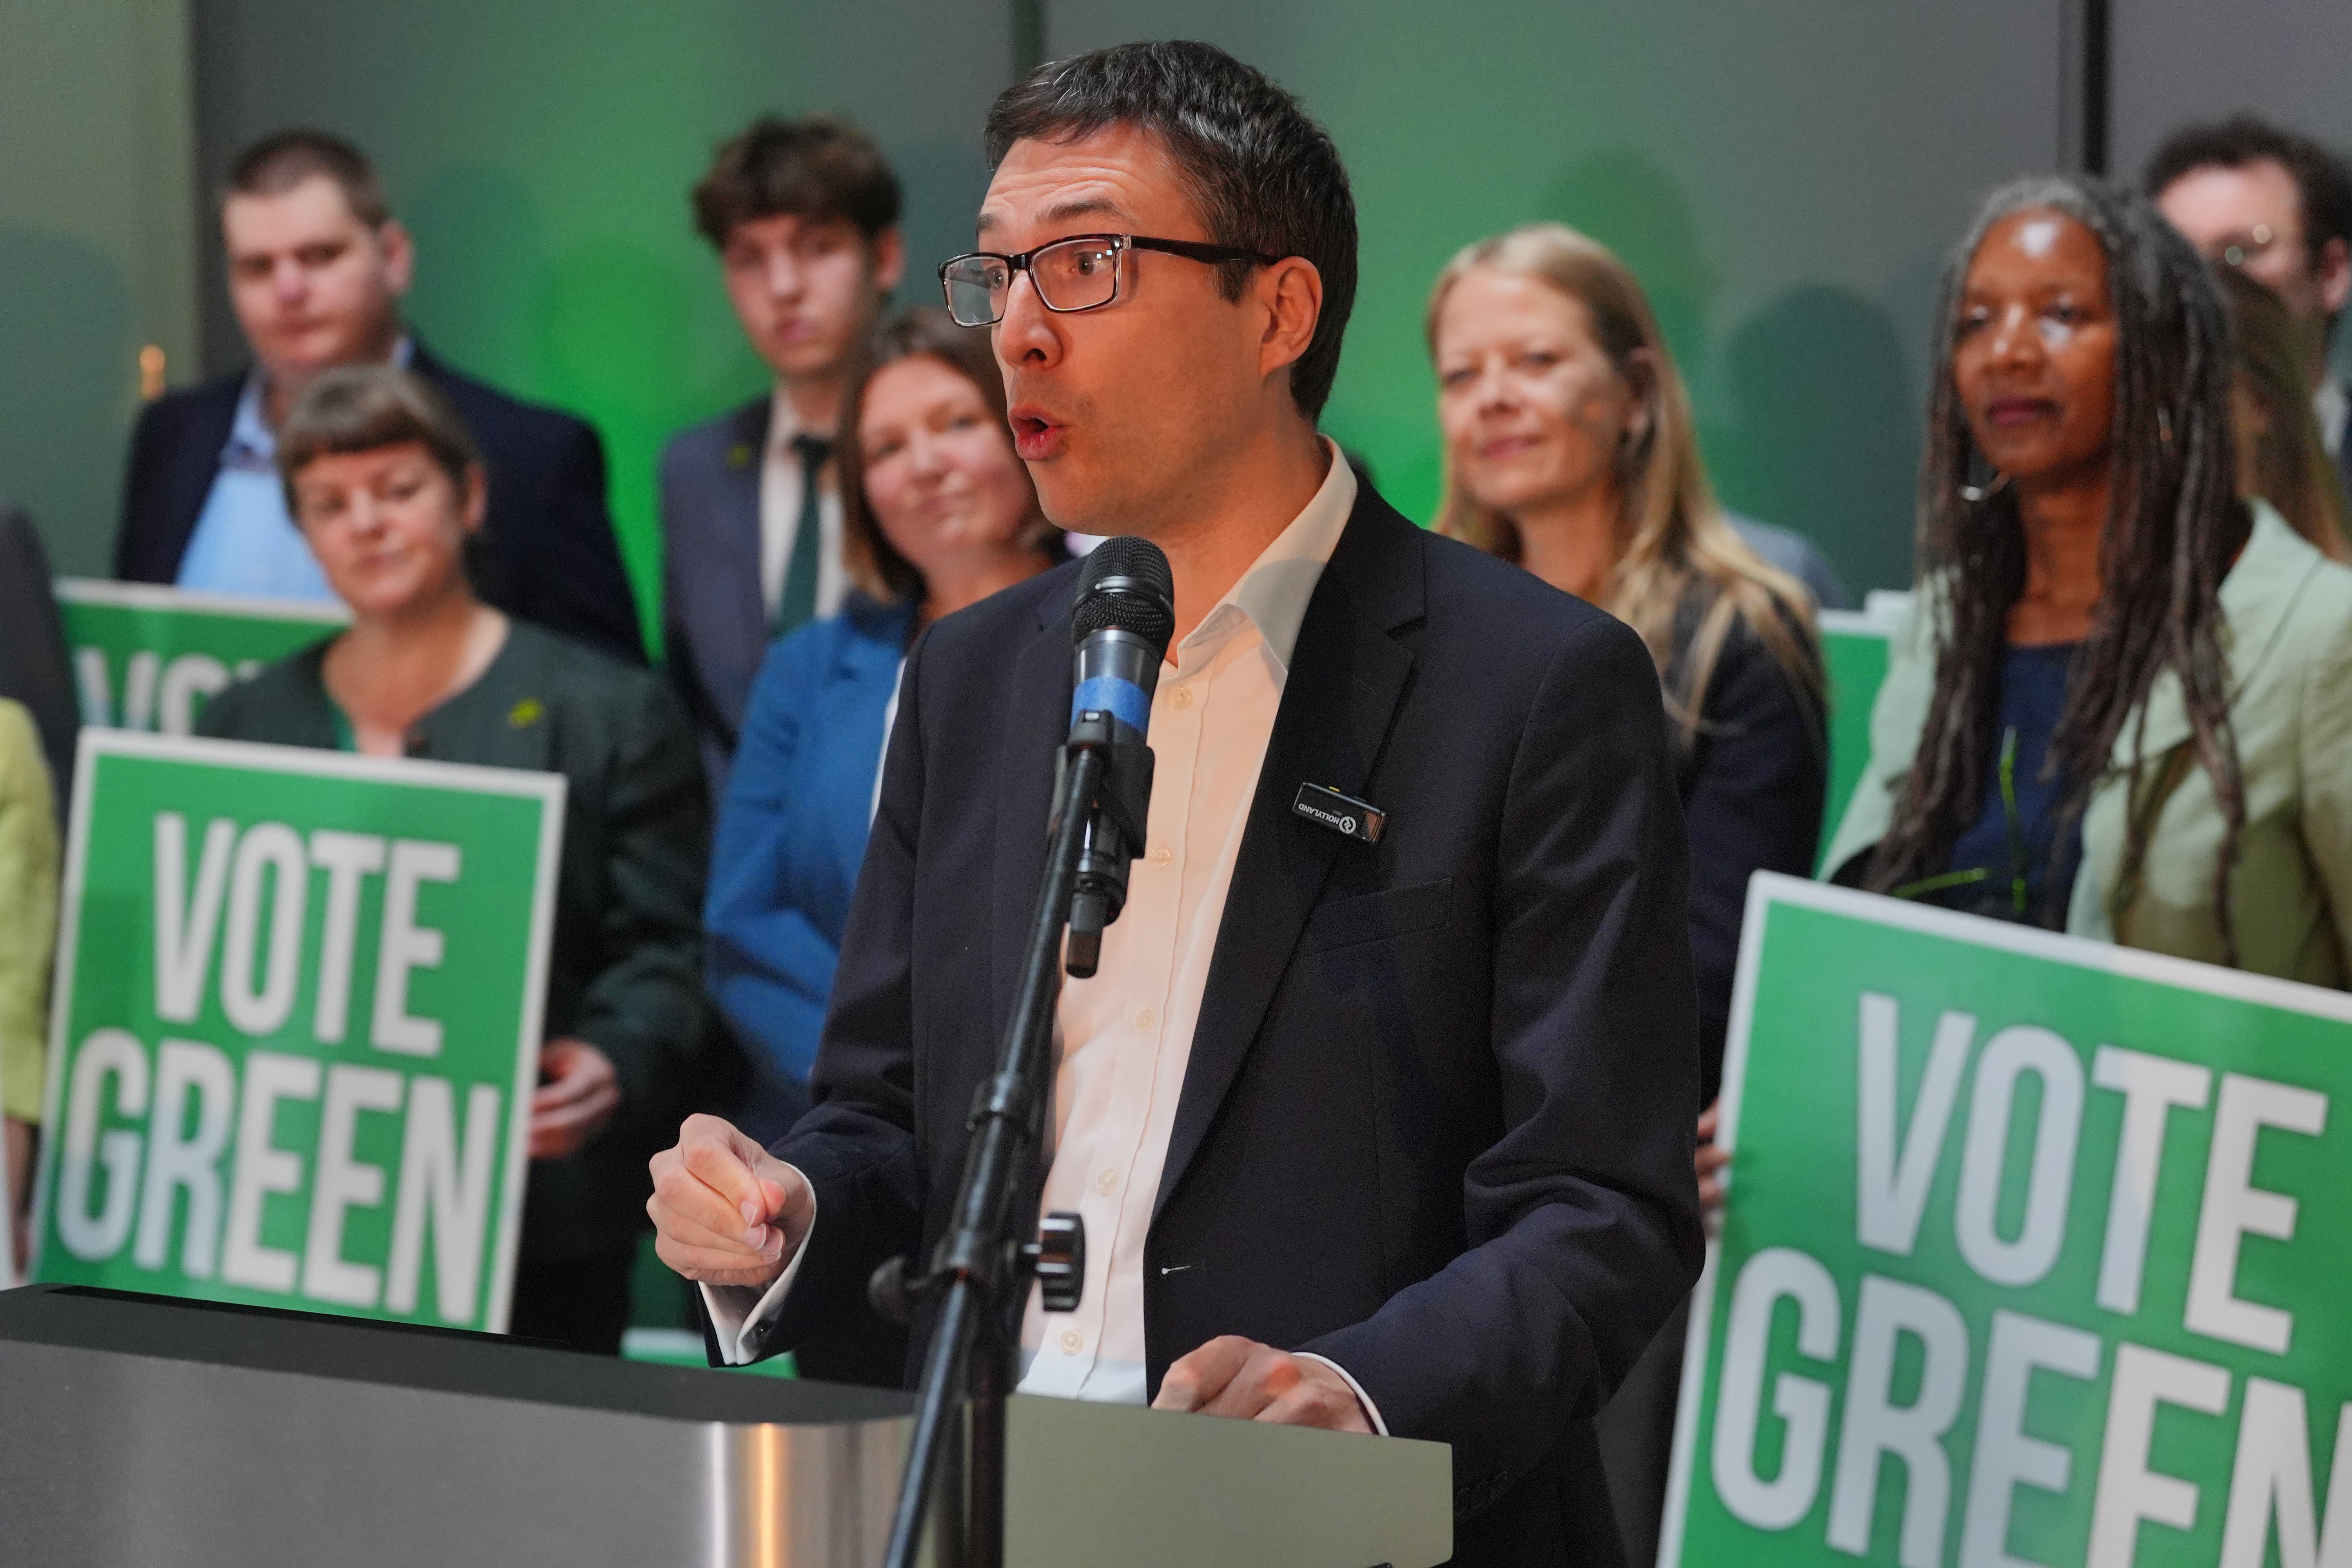 File photo: Green Party co-leader Adrian Ramsay speaking during the Green Party general election campaign launch at St George’s Bristol